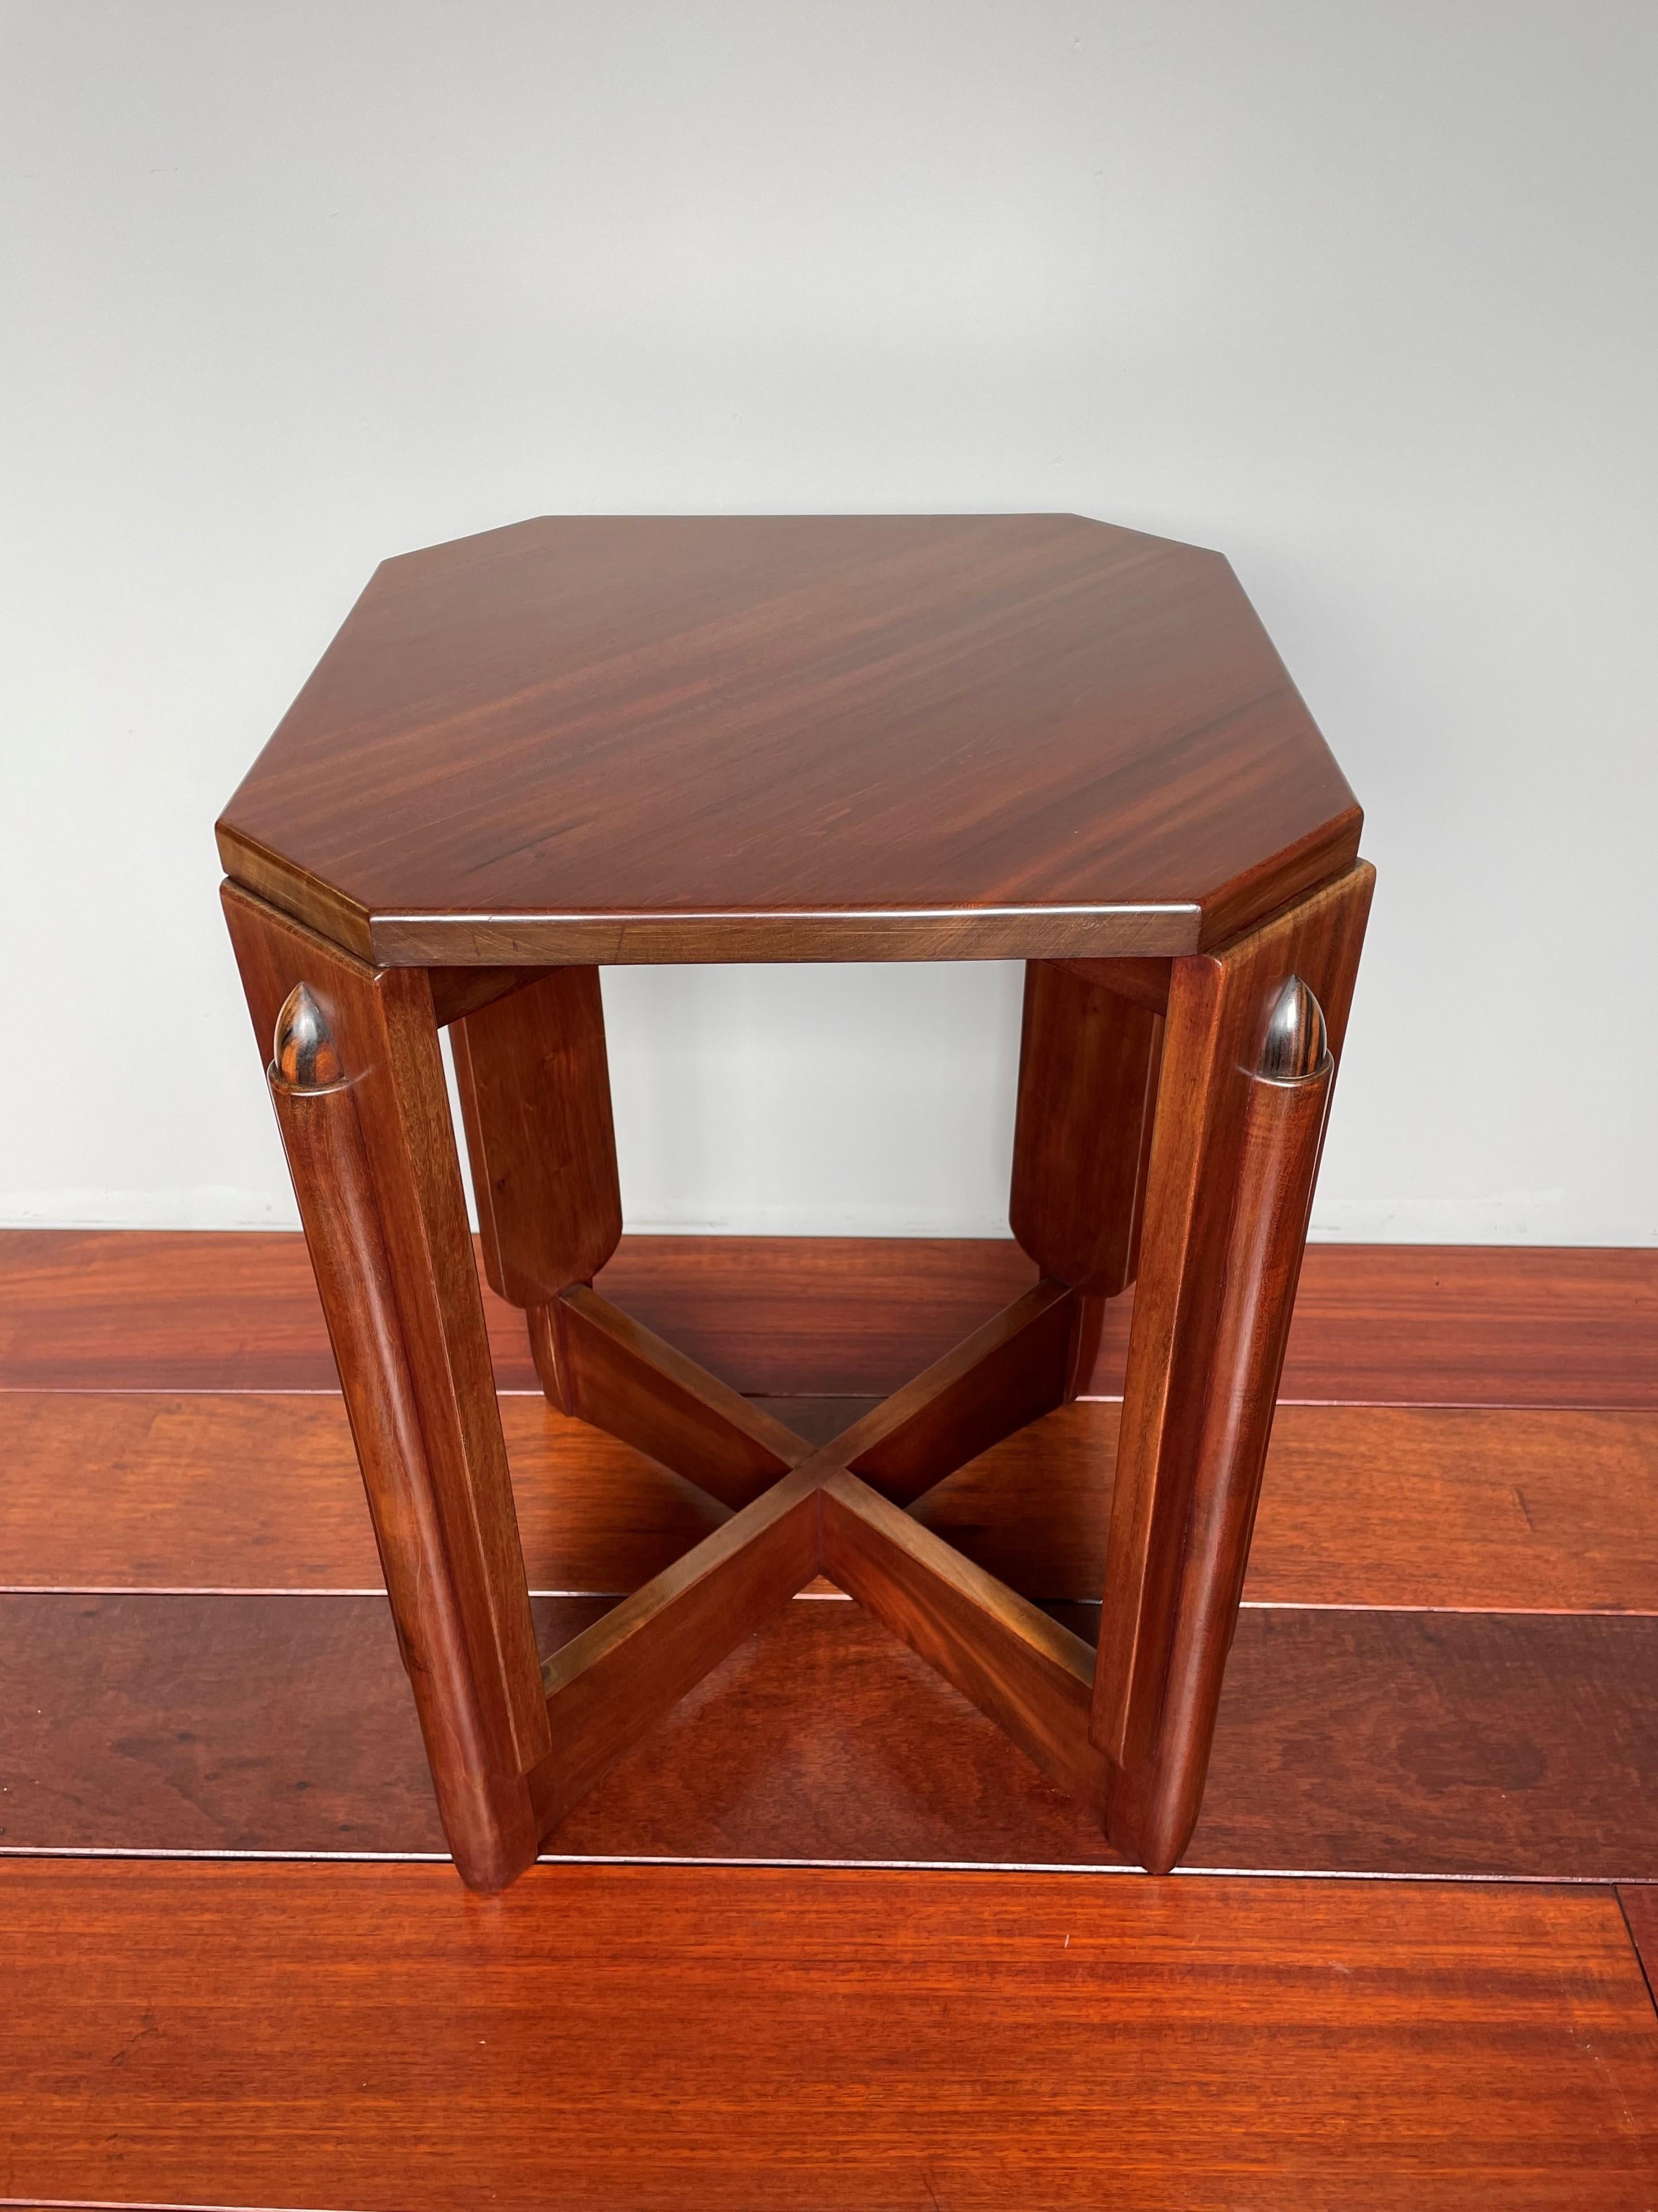 Early 20th century, multipurpose, Arts and Crafts table from Amsterdam.

In the early 1900s there were only very few designers in Amsterdam who were capable of creating these stunning, geometric and timeless designs. This almost entirely made of